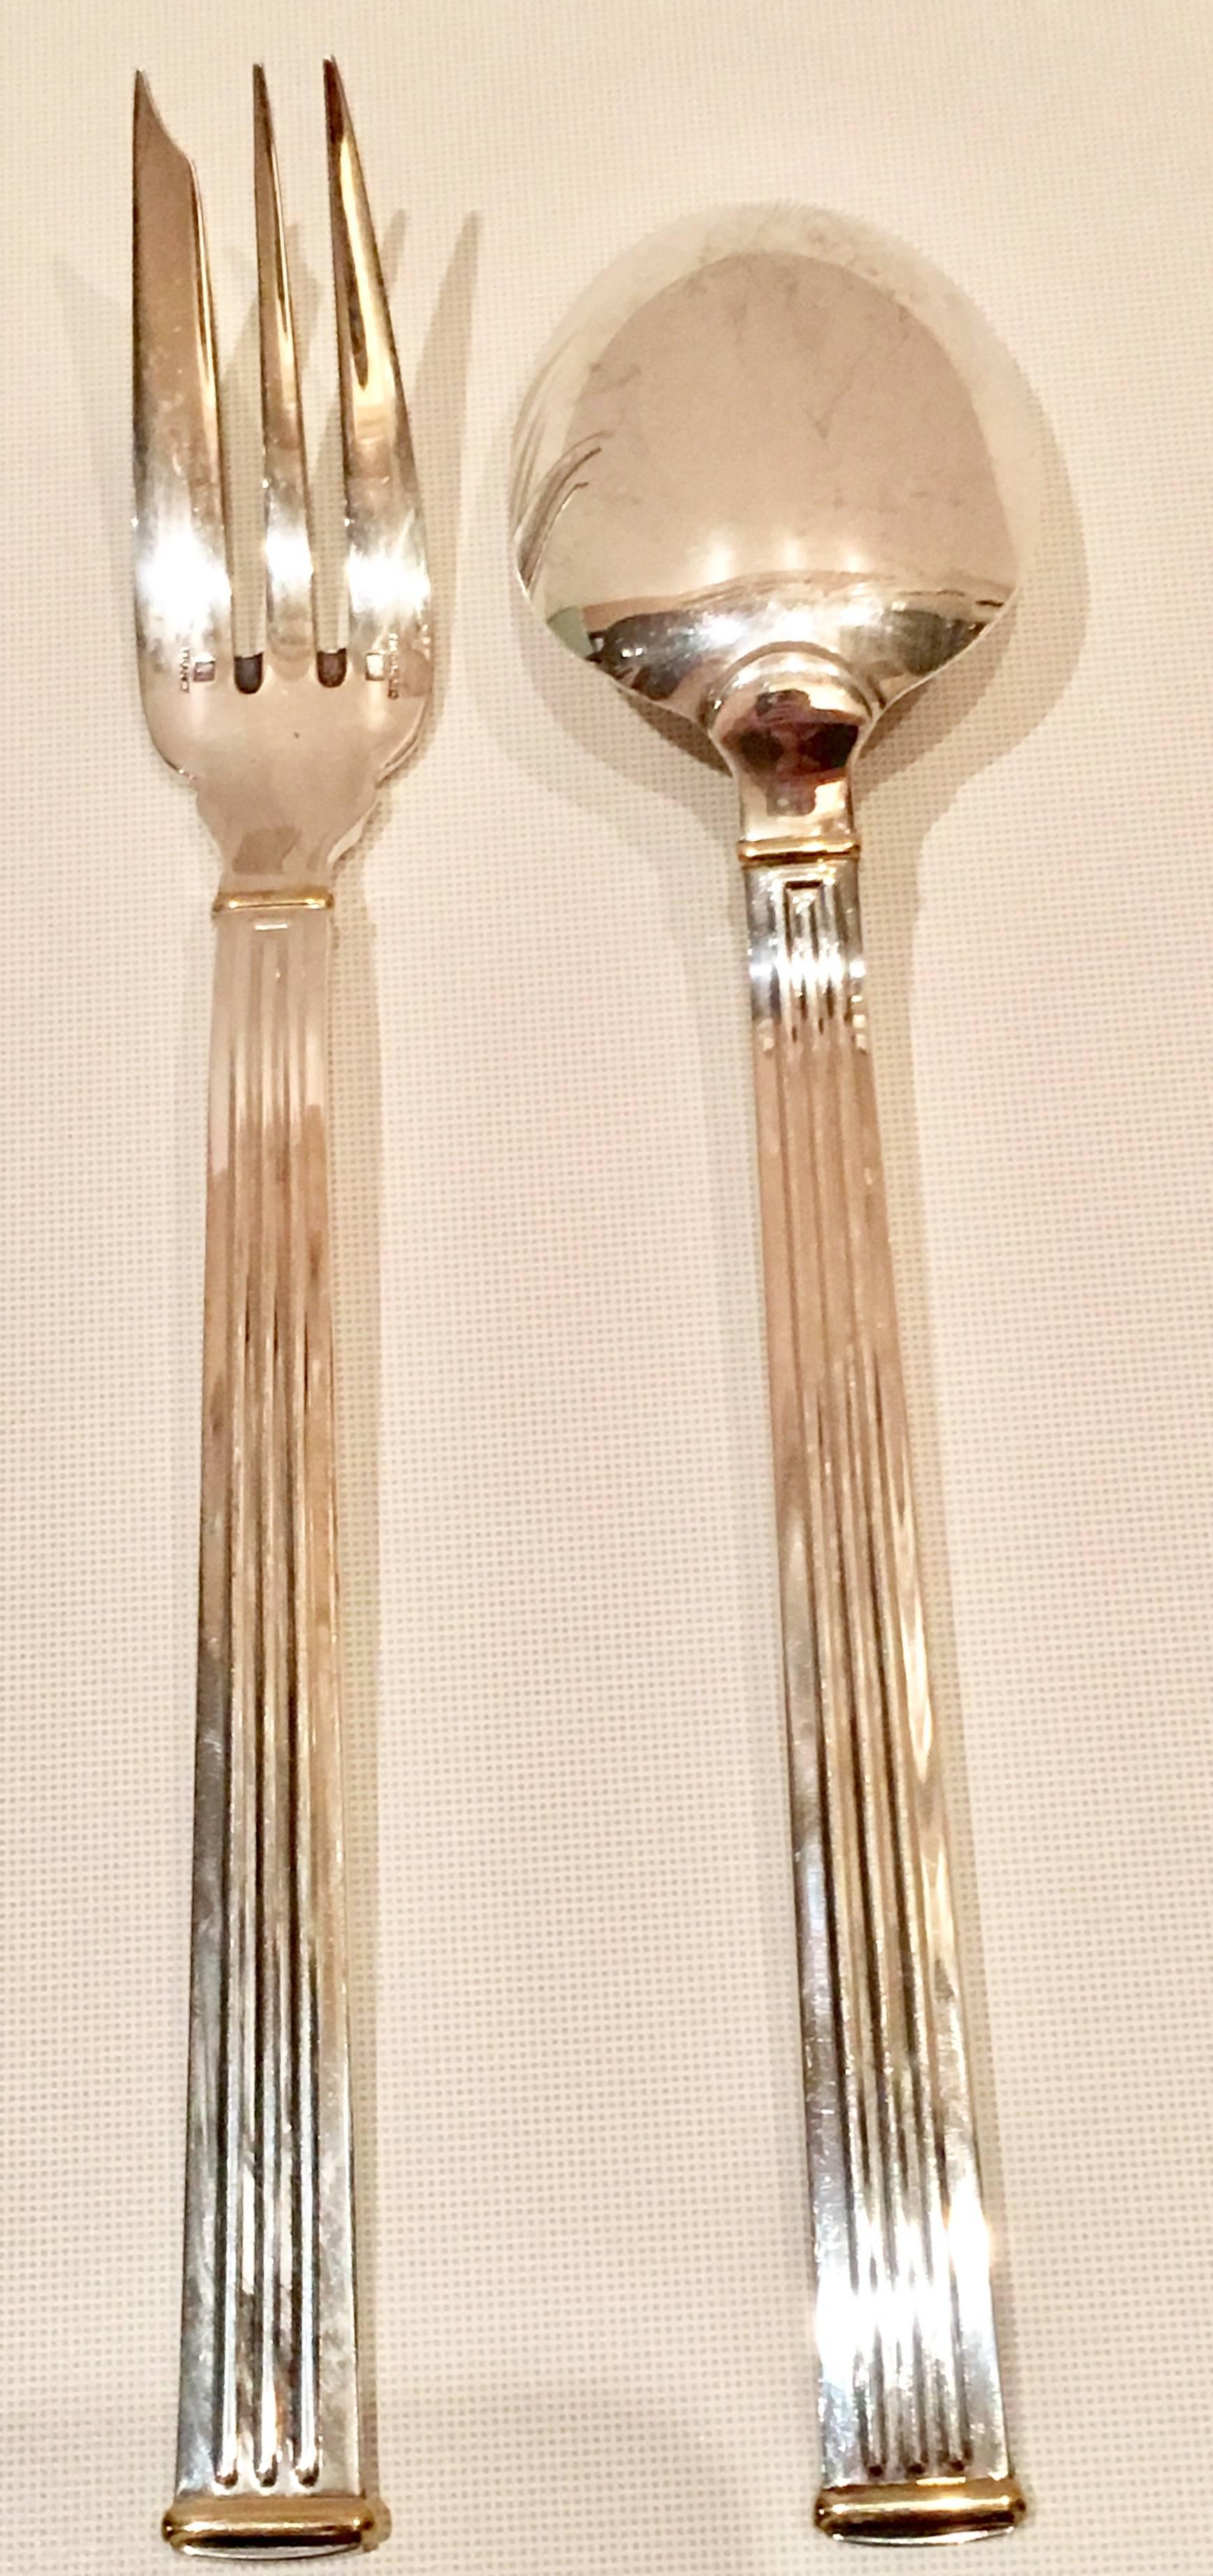 Iconic French silversmith Christofle Silver Paris Inc. 27-piece flatware set in "Triade Gold". Modern clean lines in a Classic column motif with 24-karat gold detail makes this pattern, "Triade Gold" forever timeless. The pieces